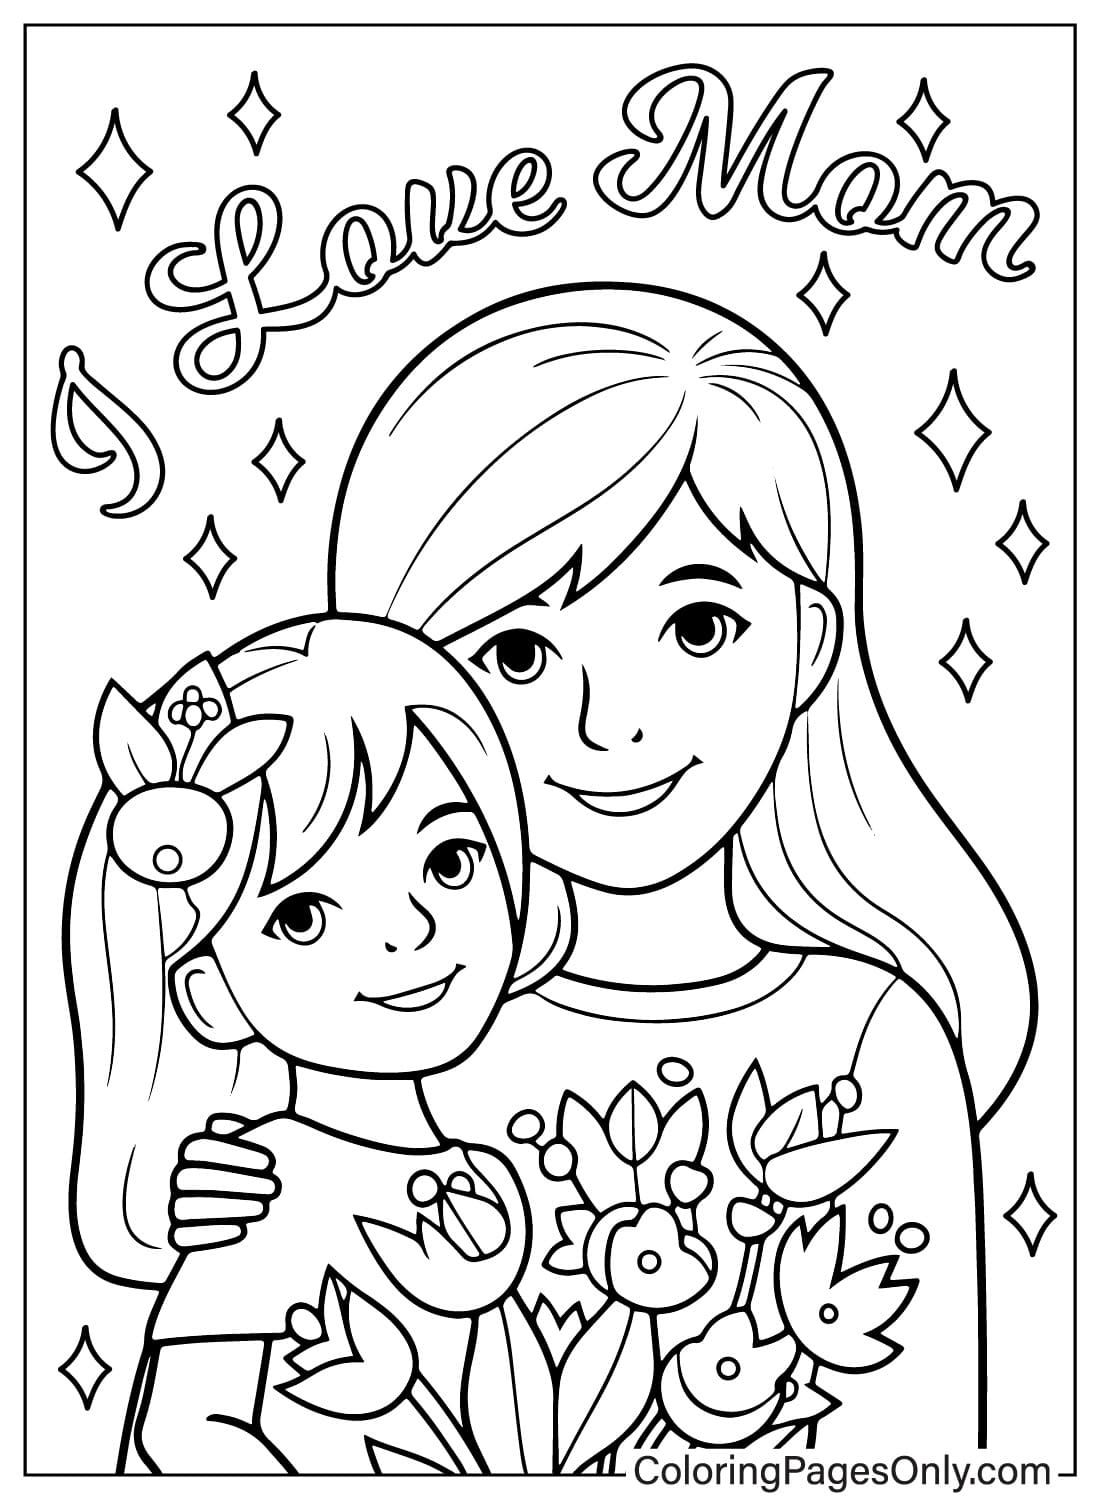 Love Mom Coloring Page from I Love Mom